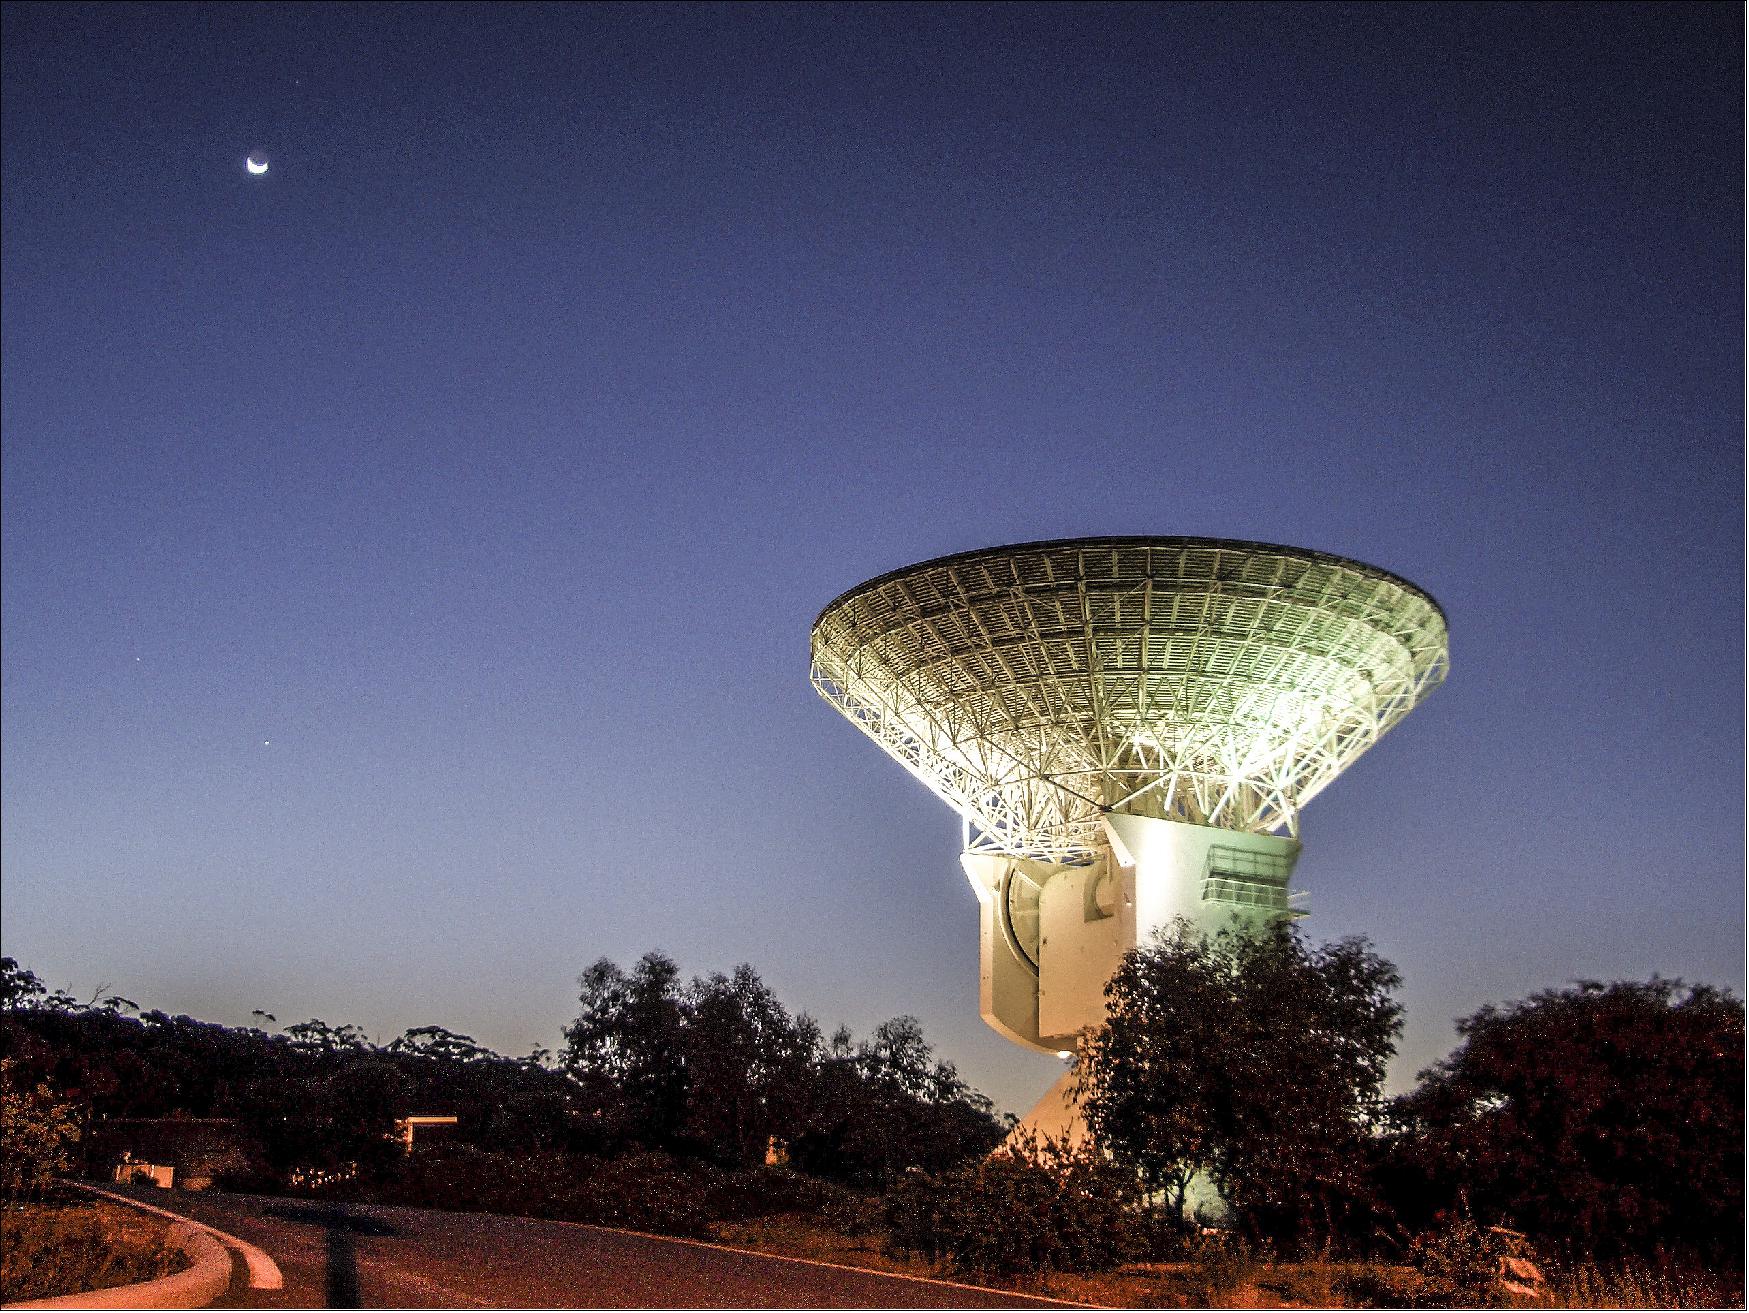 Figure 20: ESA's New Norcia station, DSA-1 (Deep Space Antenna-1), hosts a 35 m-diameter parabolic antenna. DSA-1 communicates with deep-space missions, typically at ranges in excess of 2 million km. It is also capable of supporting the ultra-precise 'delta-DOR' (Delta-Differential One-Way Ranging) navigation technique (image credit: ESA/S. Marti) 16)